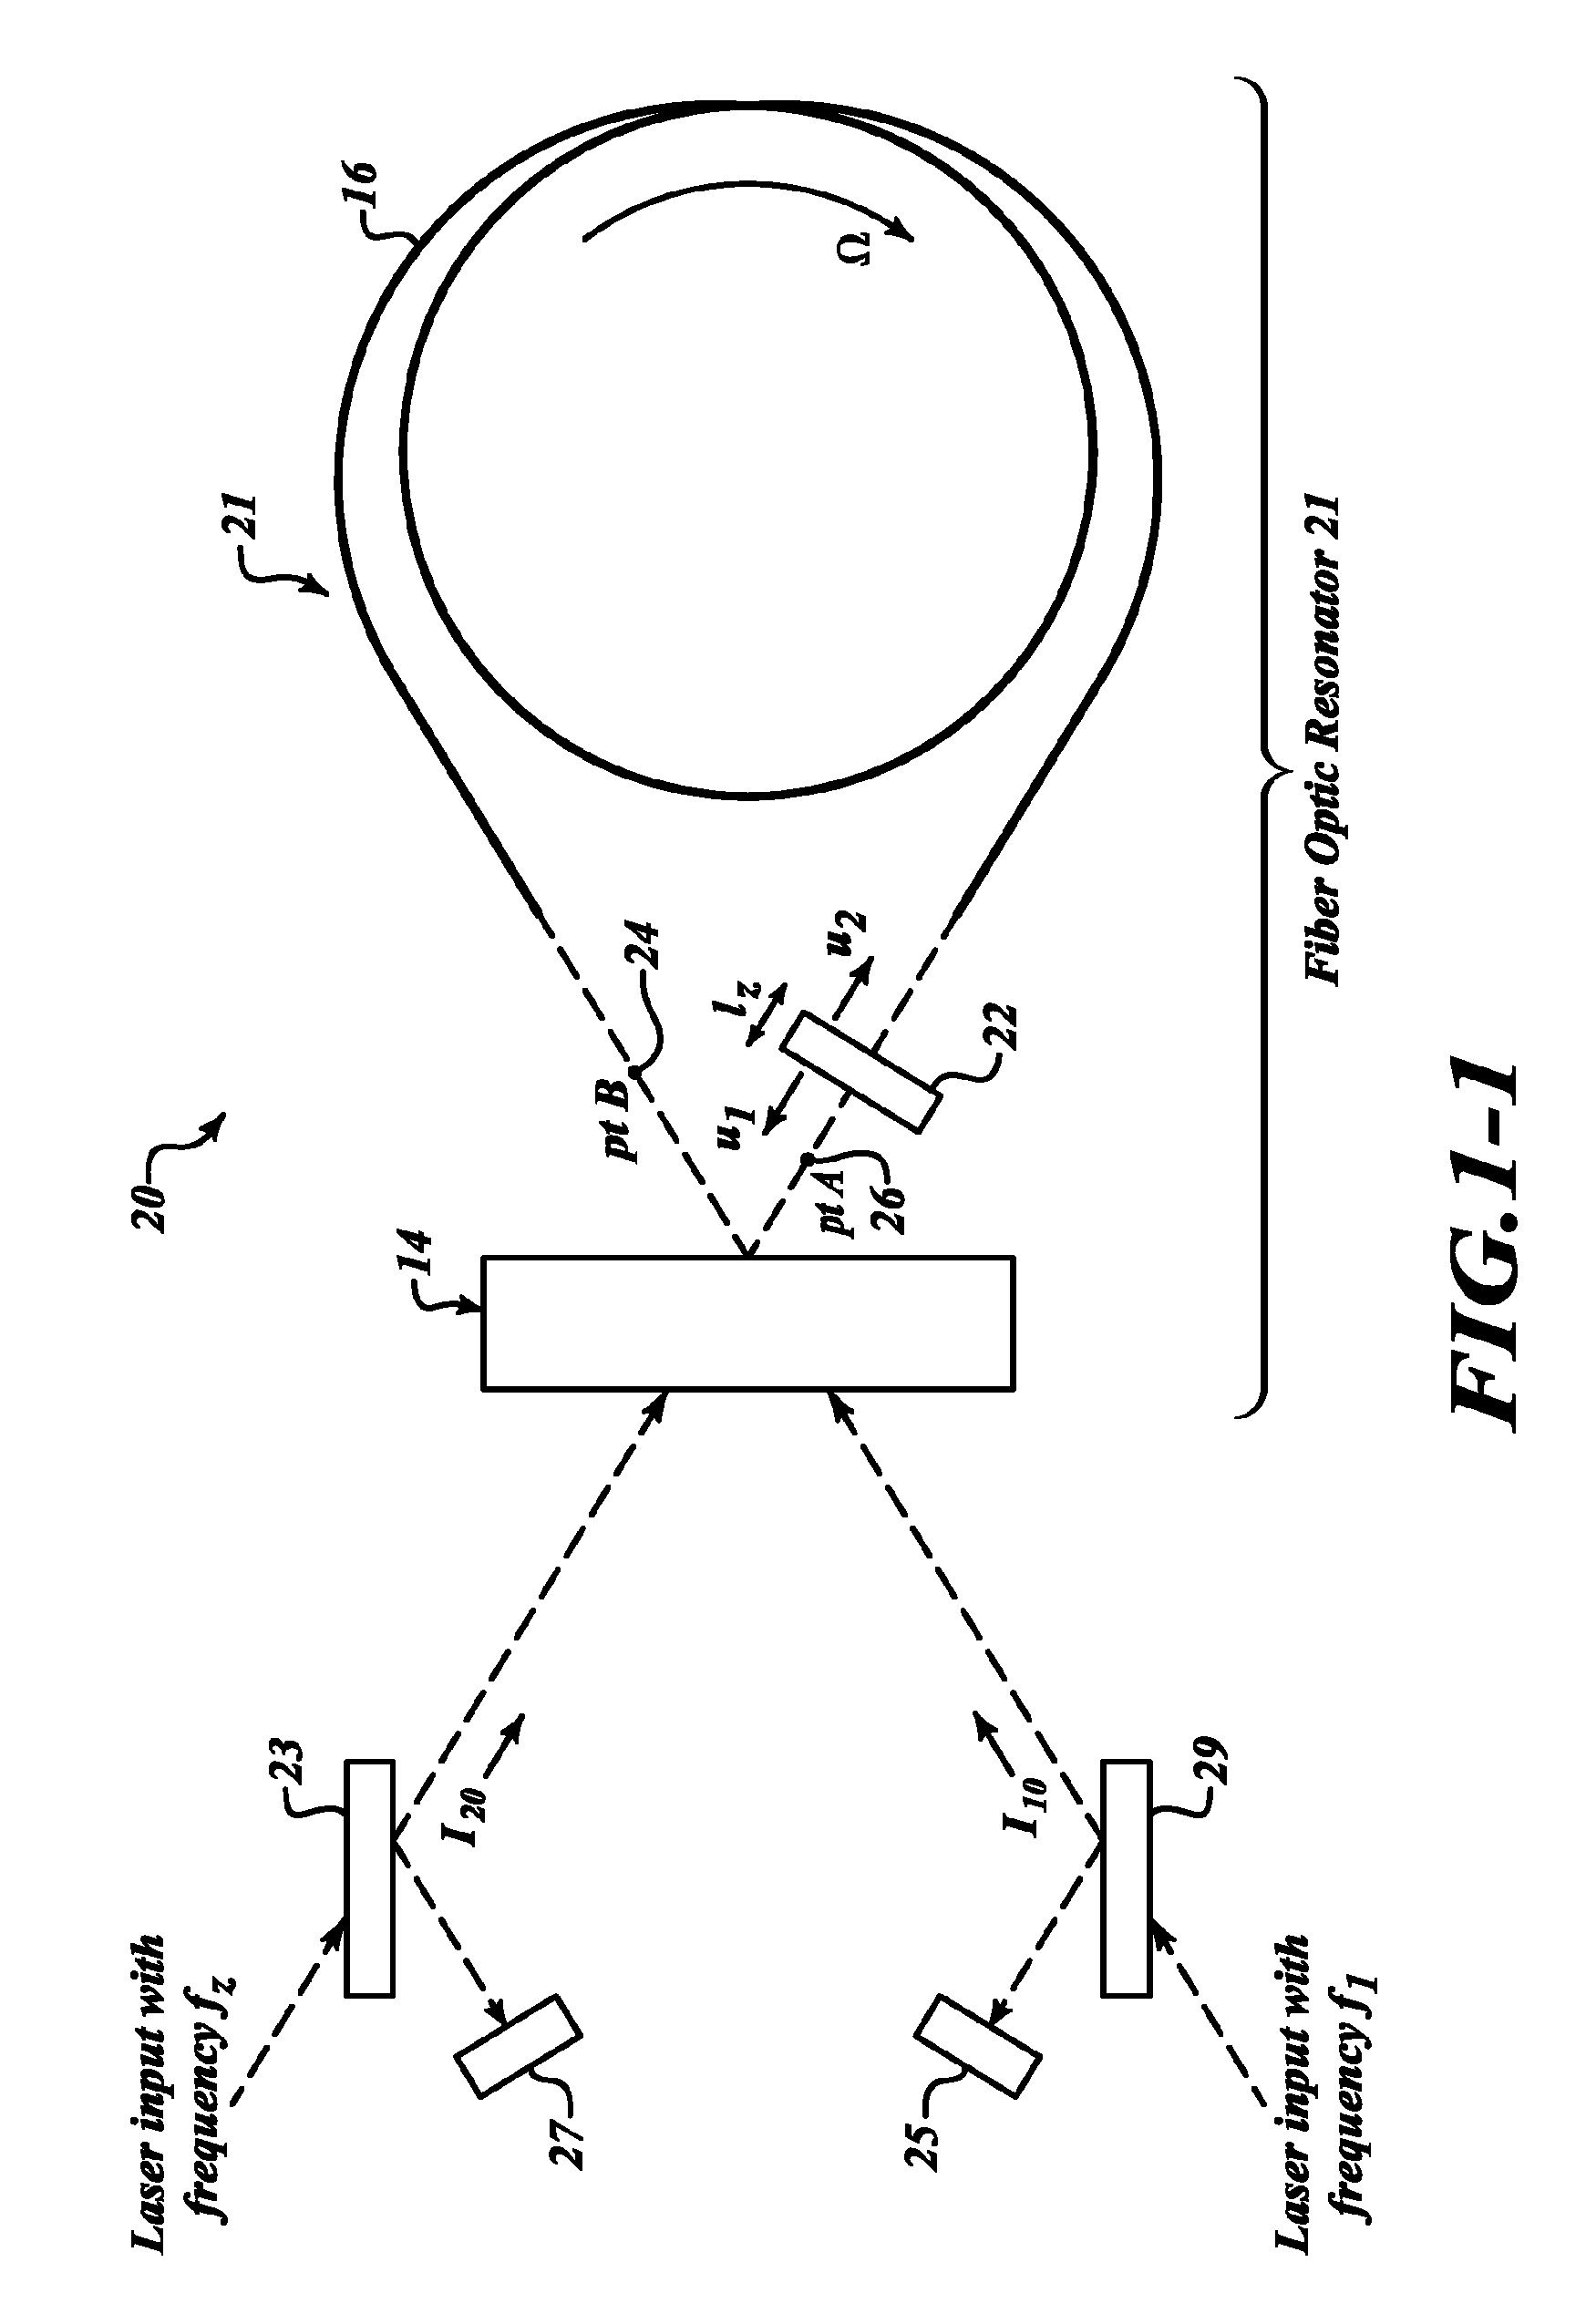 Kerr effect compensated optical ring resonator